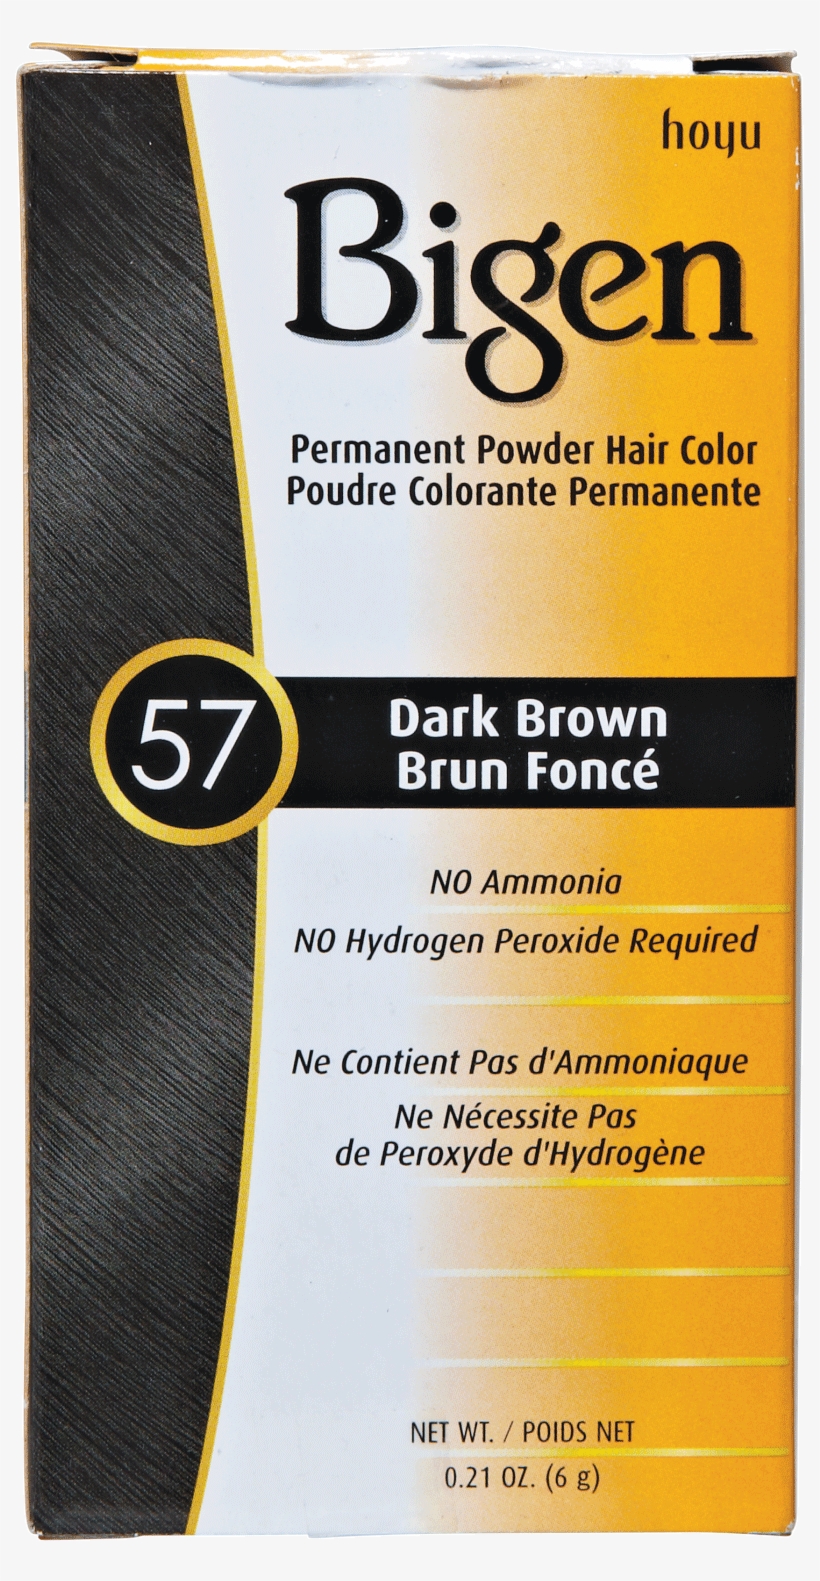 Dark Brown Permanent Powder Hair Color By Bigen - Bigen Permanent Powder Hair Color 57 Dark Brown 1 Ea, transparent png #997302